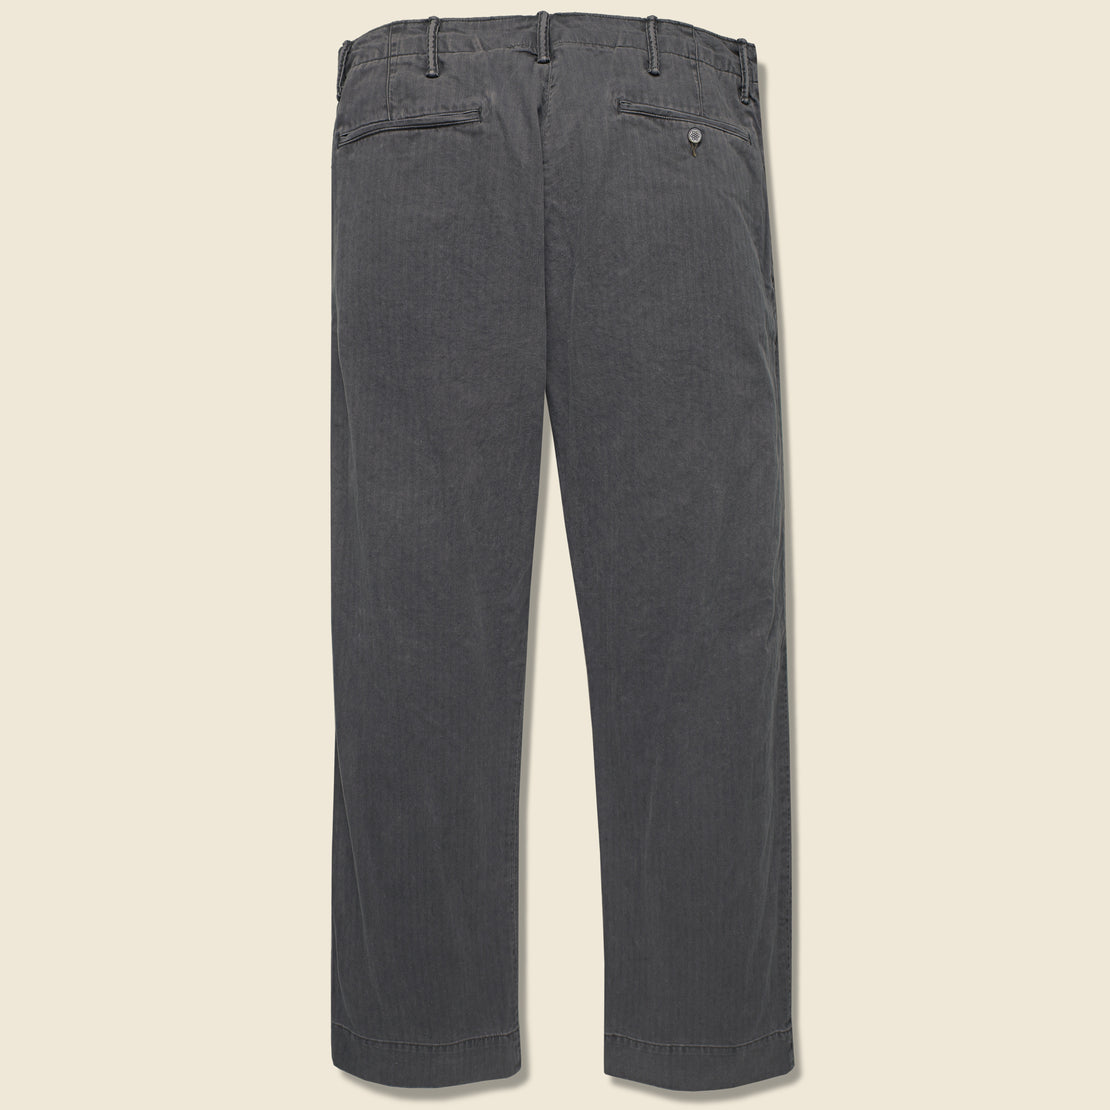 Cotton Field Chino - Washed Black - RRL - STAG Provisions - Pants - Twill